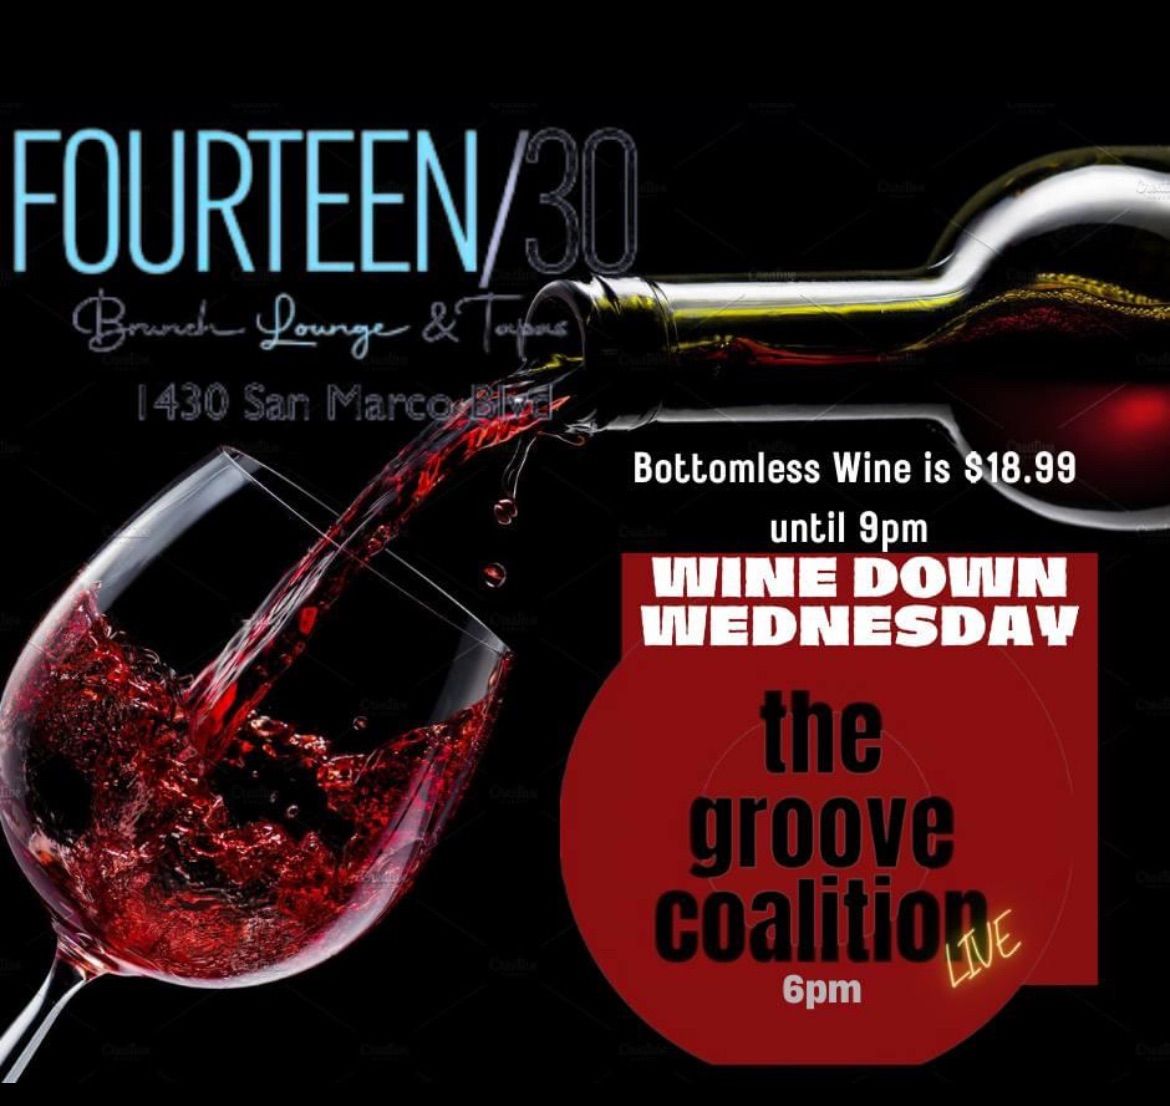 Wine Down Wednesday with The Groove Coalition